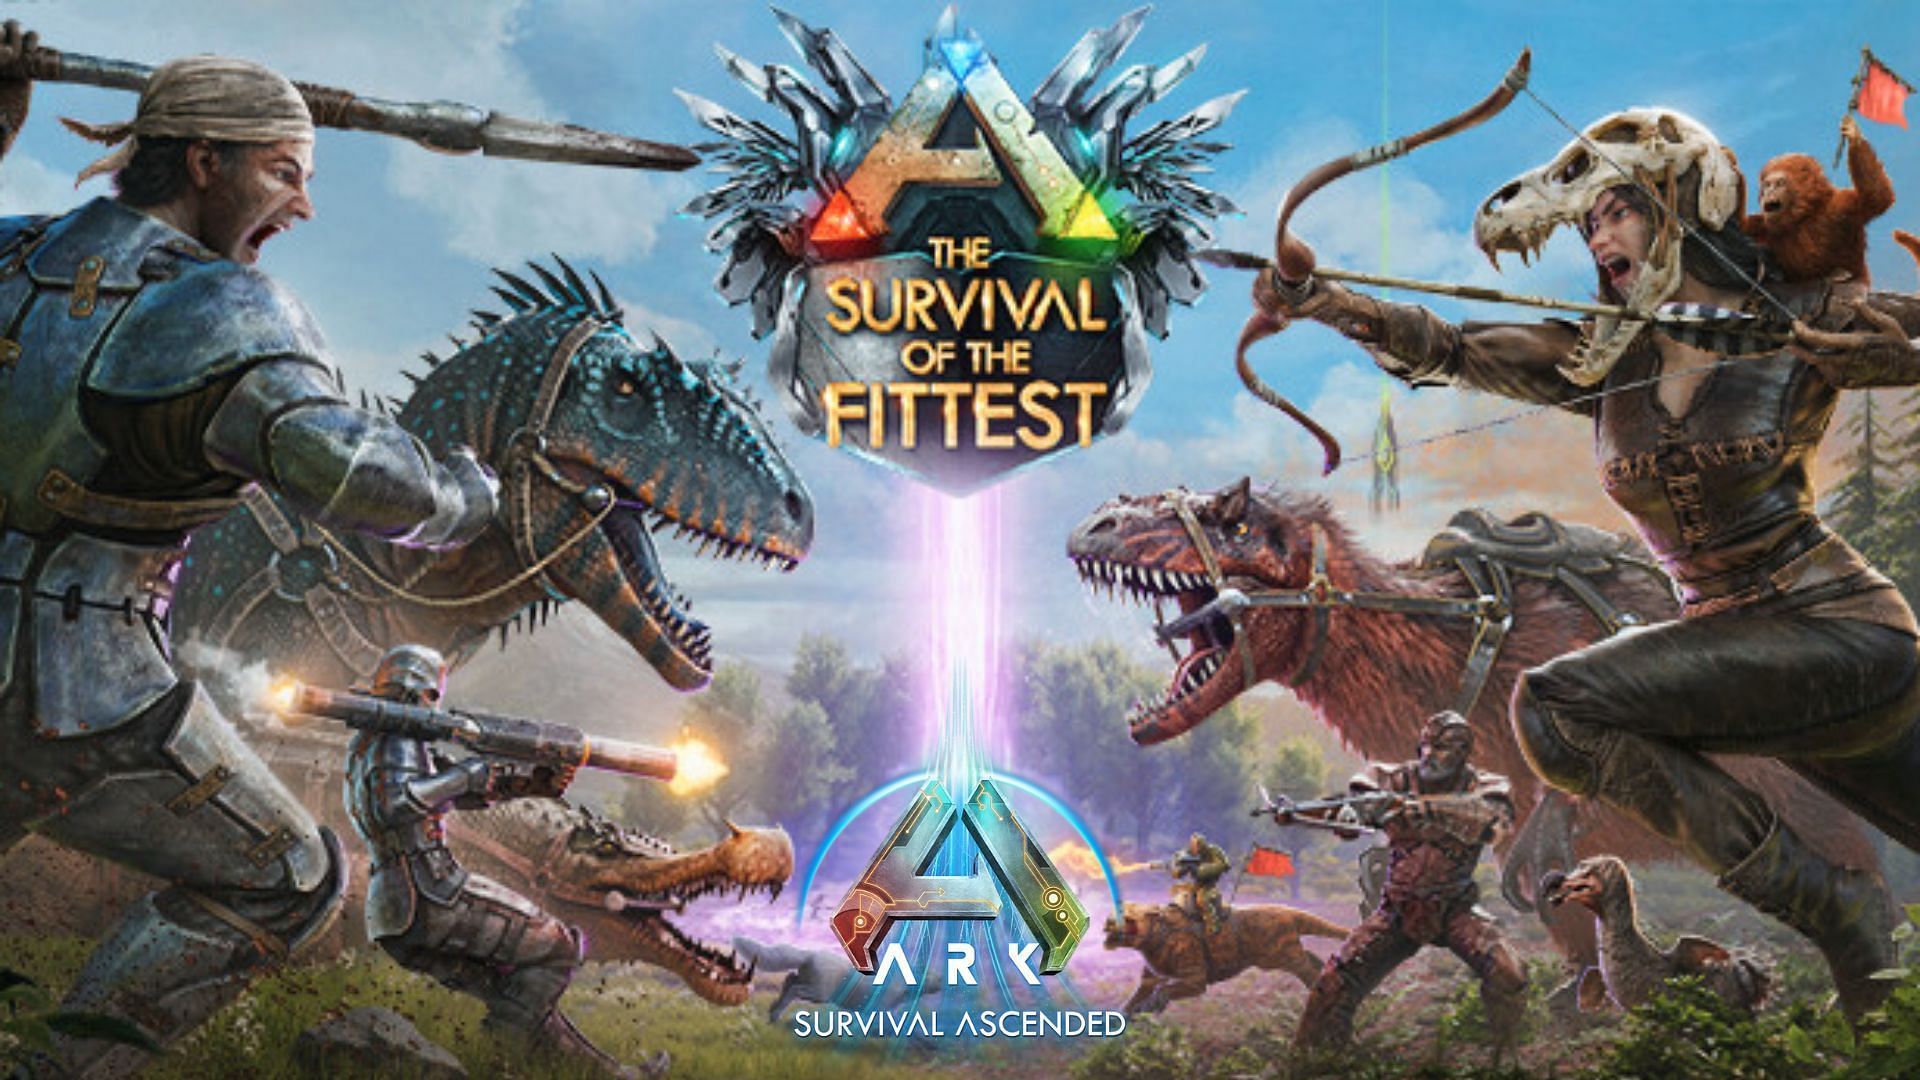 begginers guide for Ark Survival Ascended - Survival of the Fittest